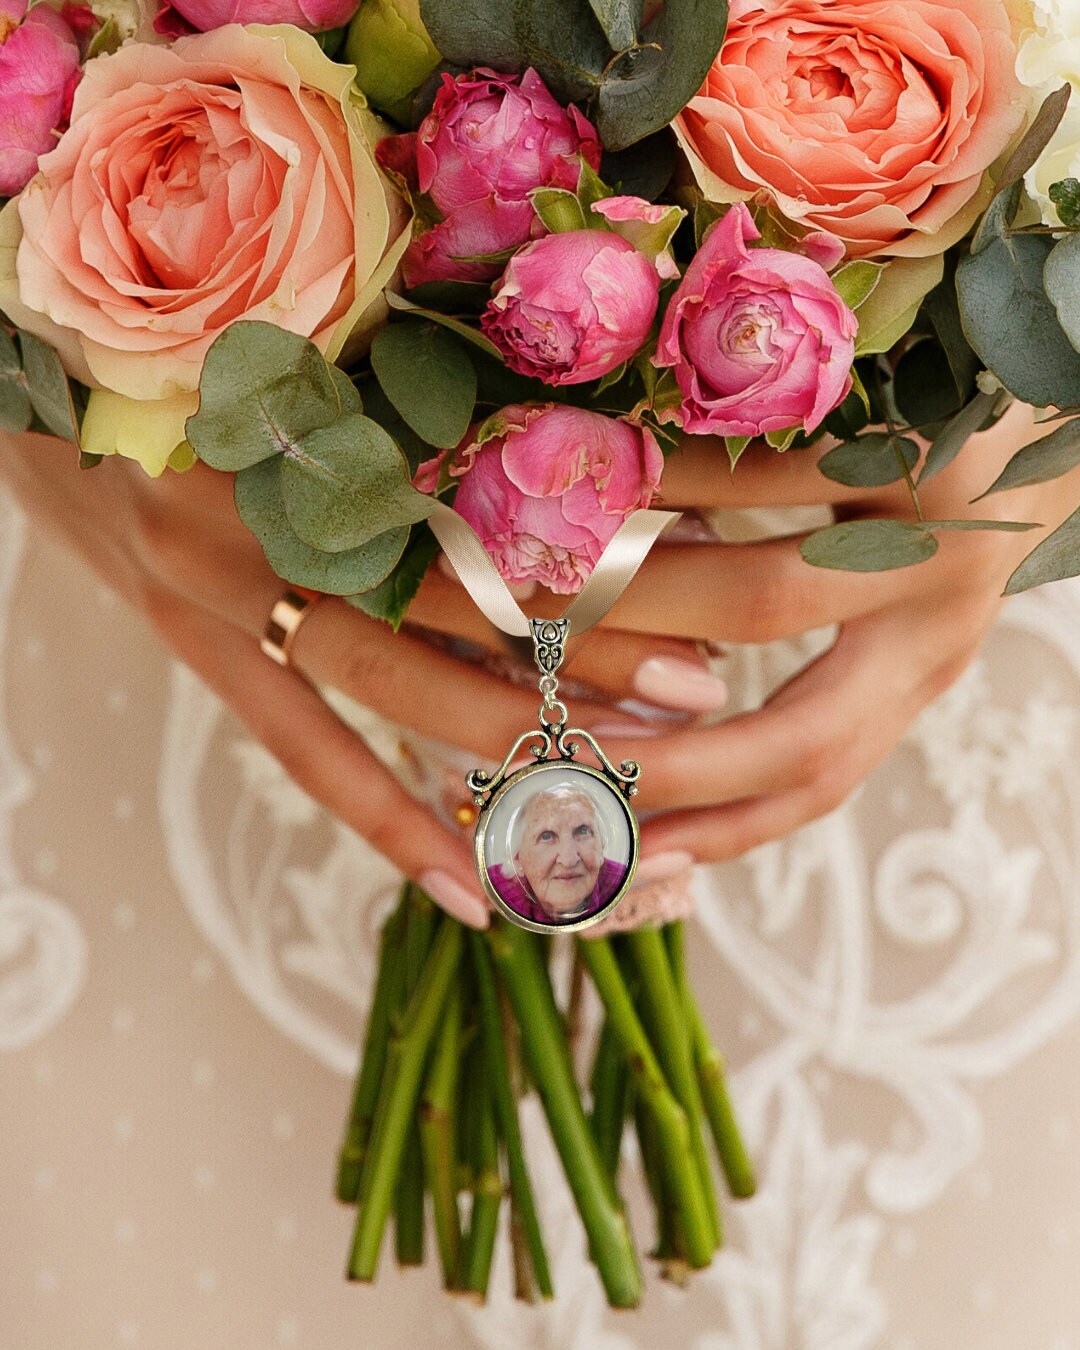  Memory Photo Charms For Wedding Bouquet In Remembrance of  Parents Mom and Dad You Walk Beside Me Vintage Bronze Cream Glass Jewelry  White Bead 2 Frames Ties to Bride's Flowers DIY